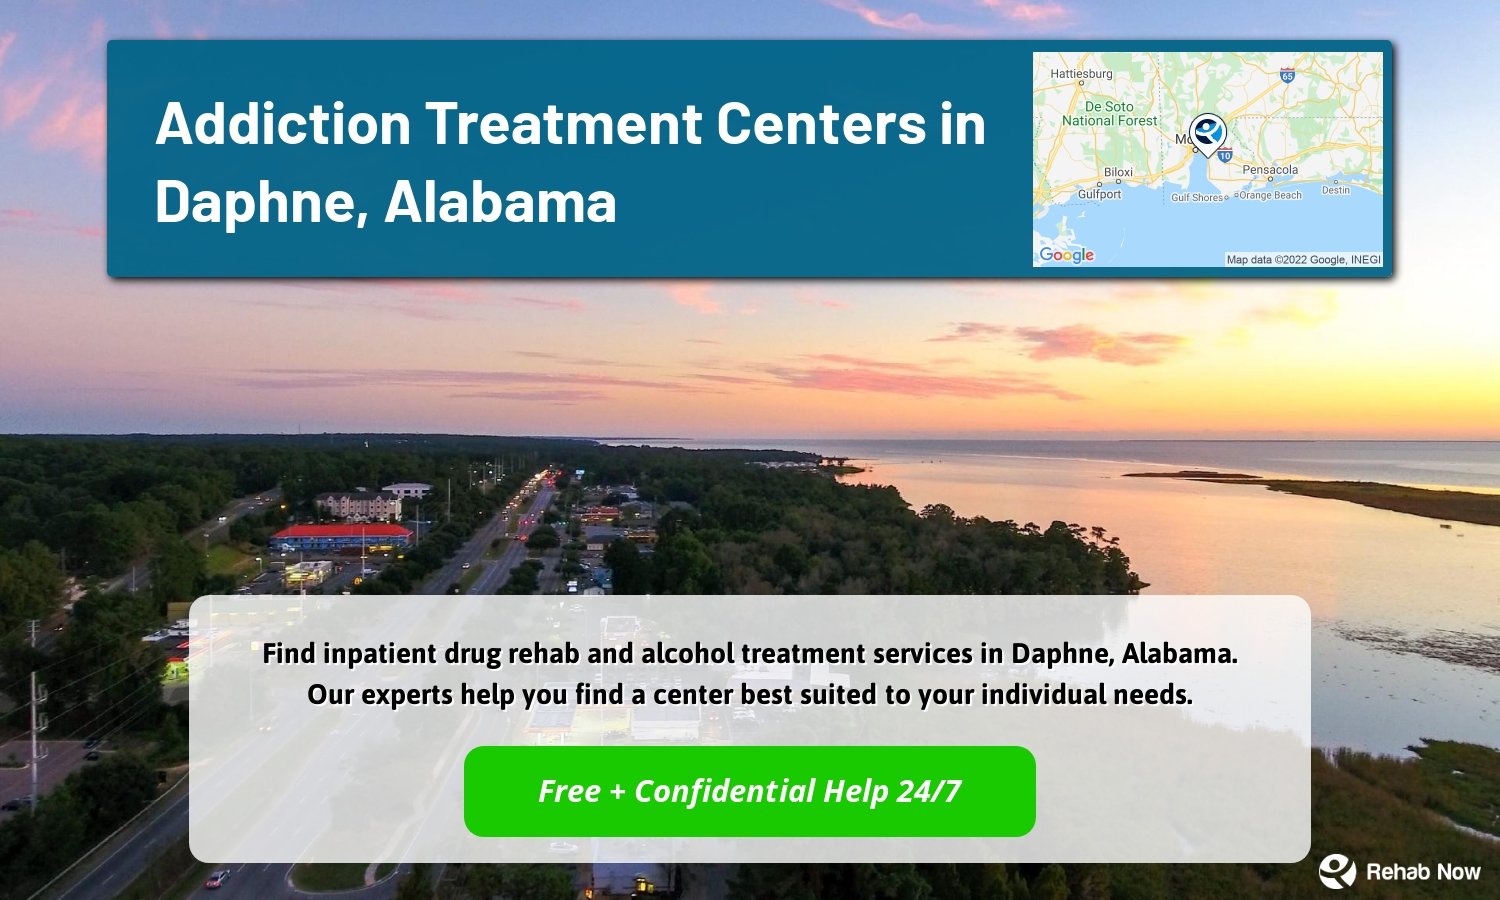 Find inpatient drug rehab and alcohol treatment services in Daphne, Alabama. Our experts help you find a center best suited to your individual needs.